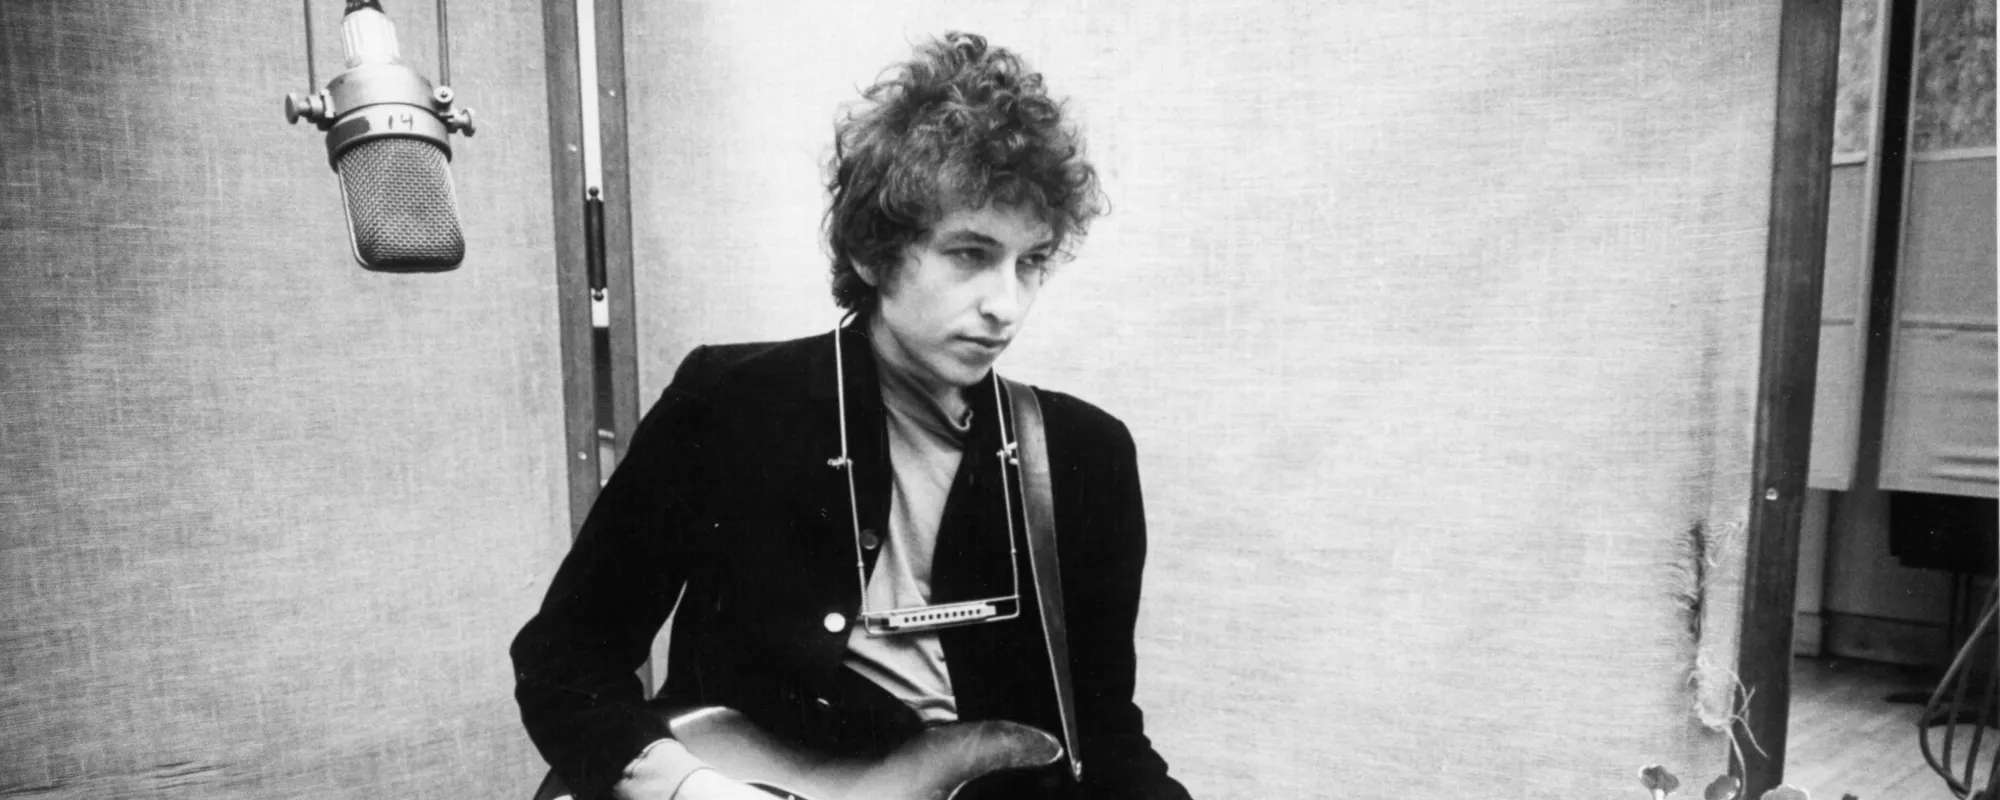 Meaning Behind Bob Dylan’s Timeless Protest Song “The Times They Are a-Changin'”